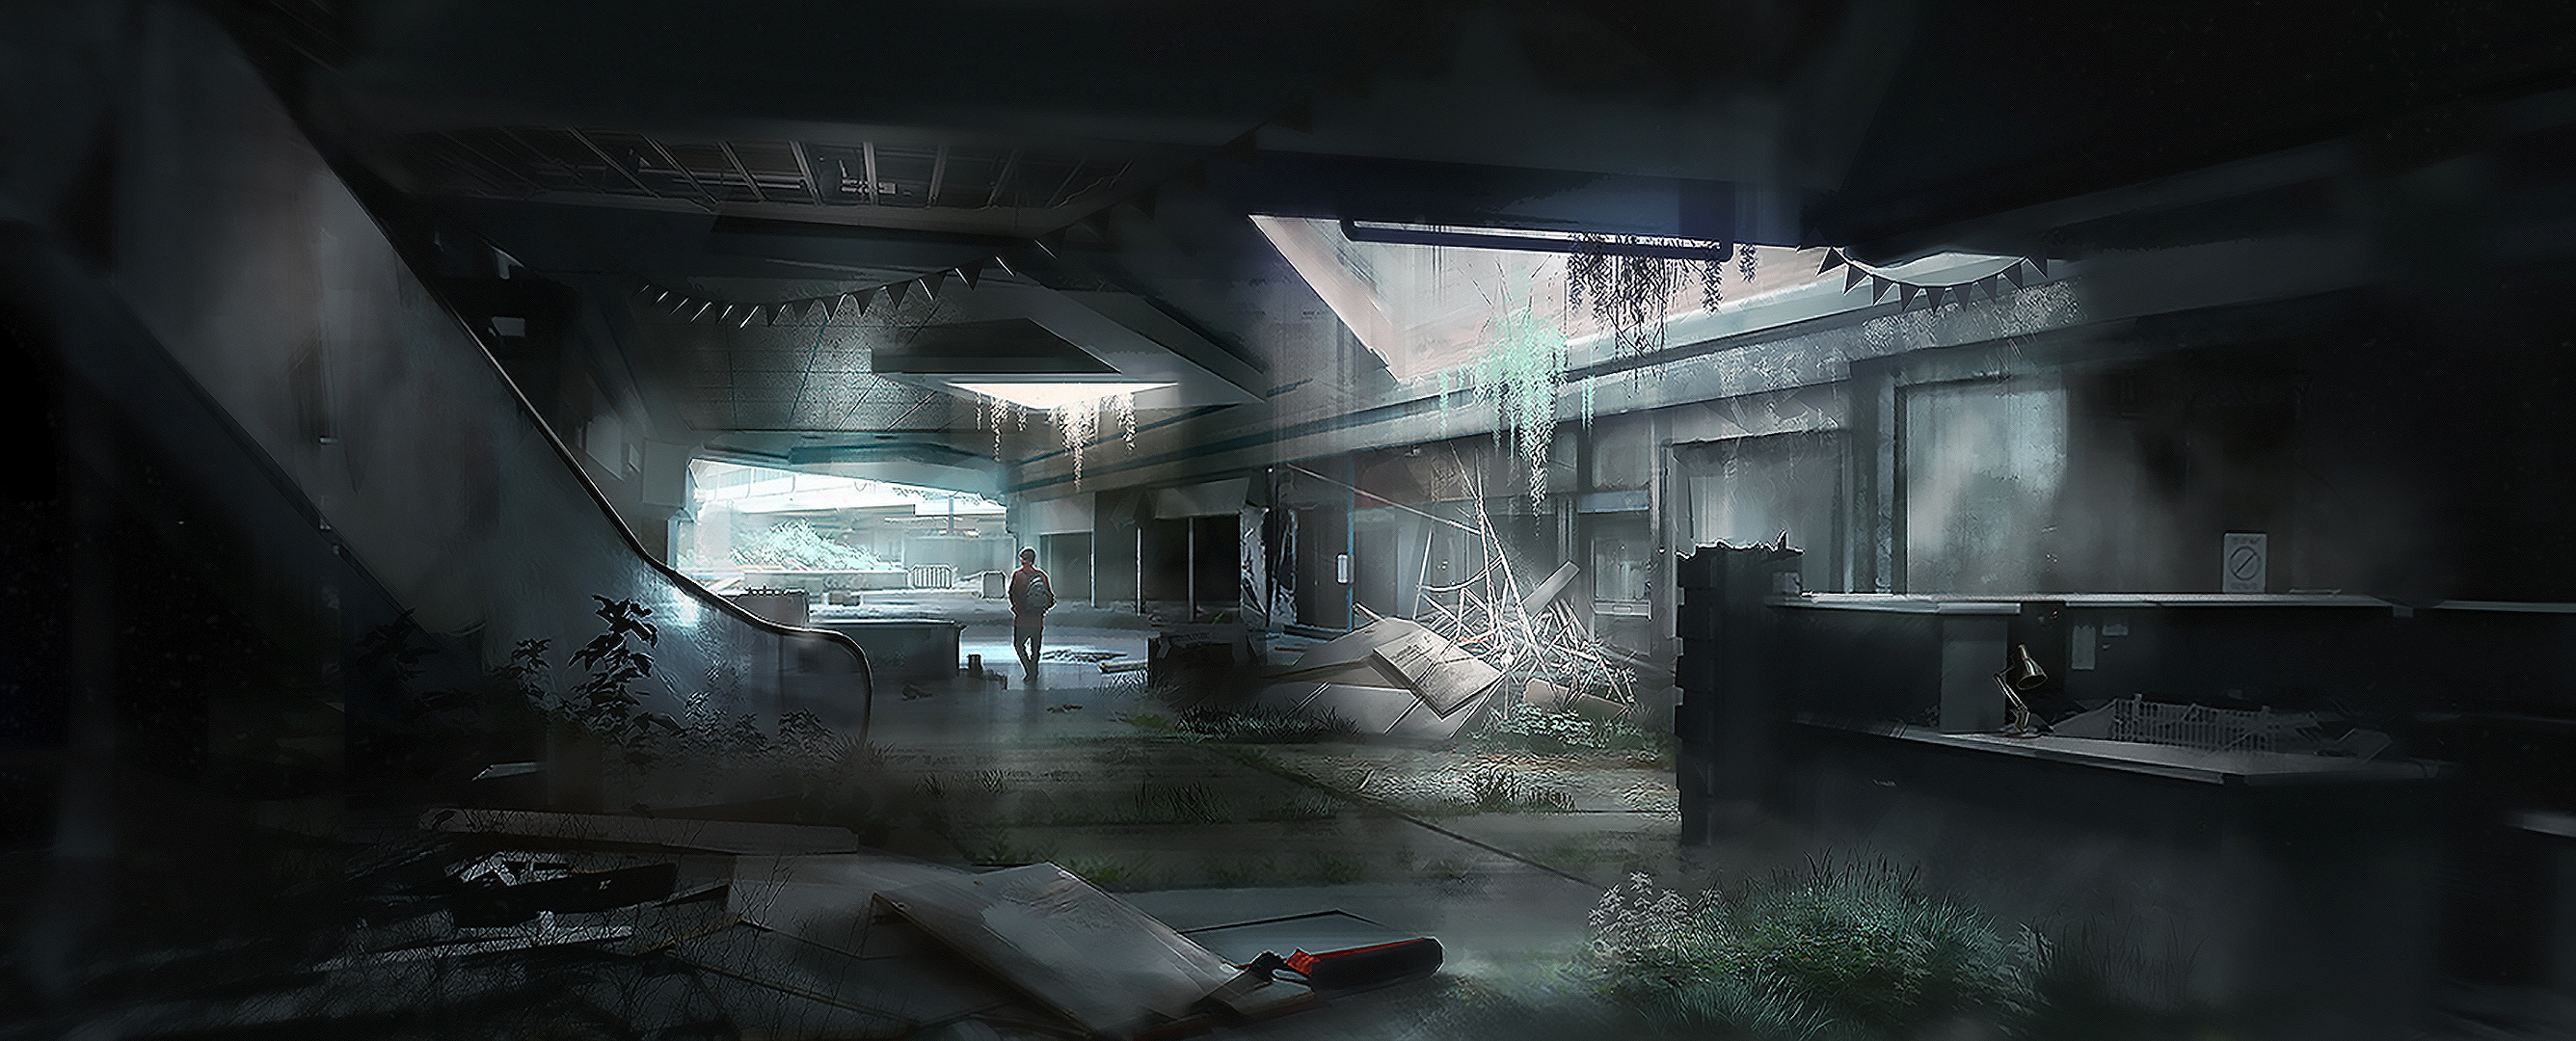 Sci Fi Post Apocalyptic Picture by Jordan Grimmer